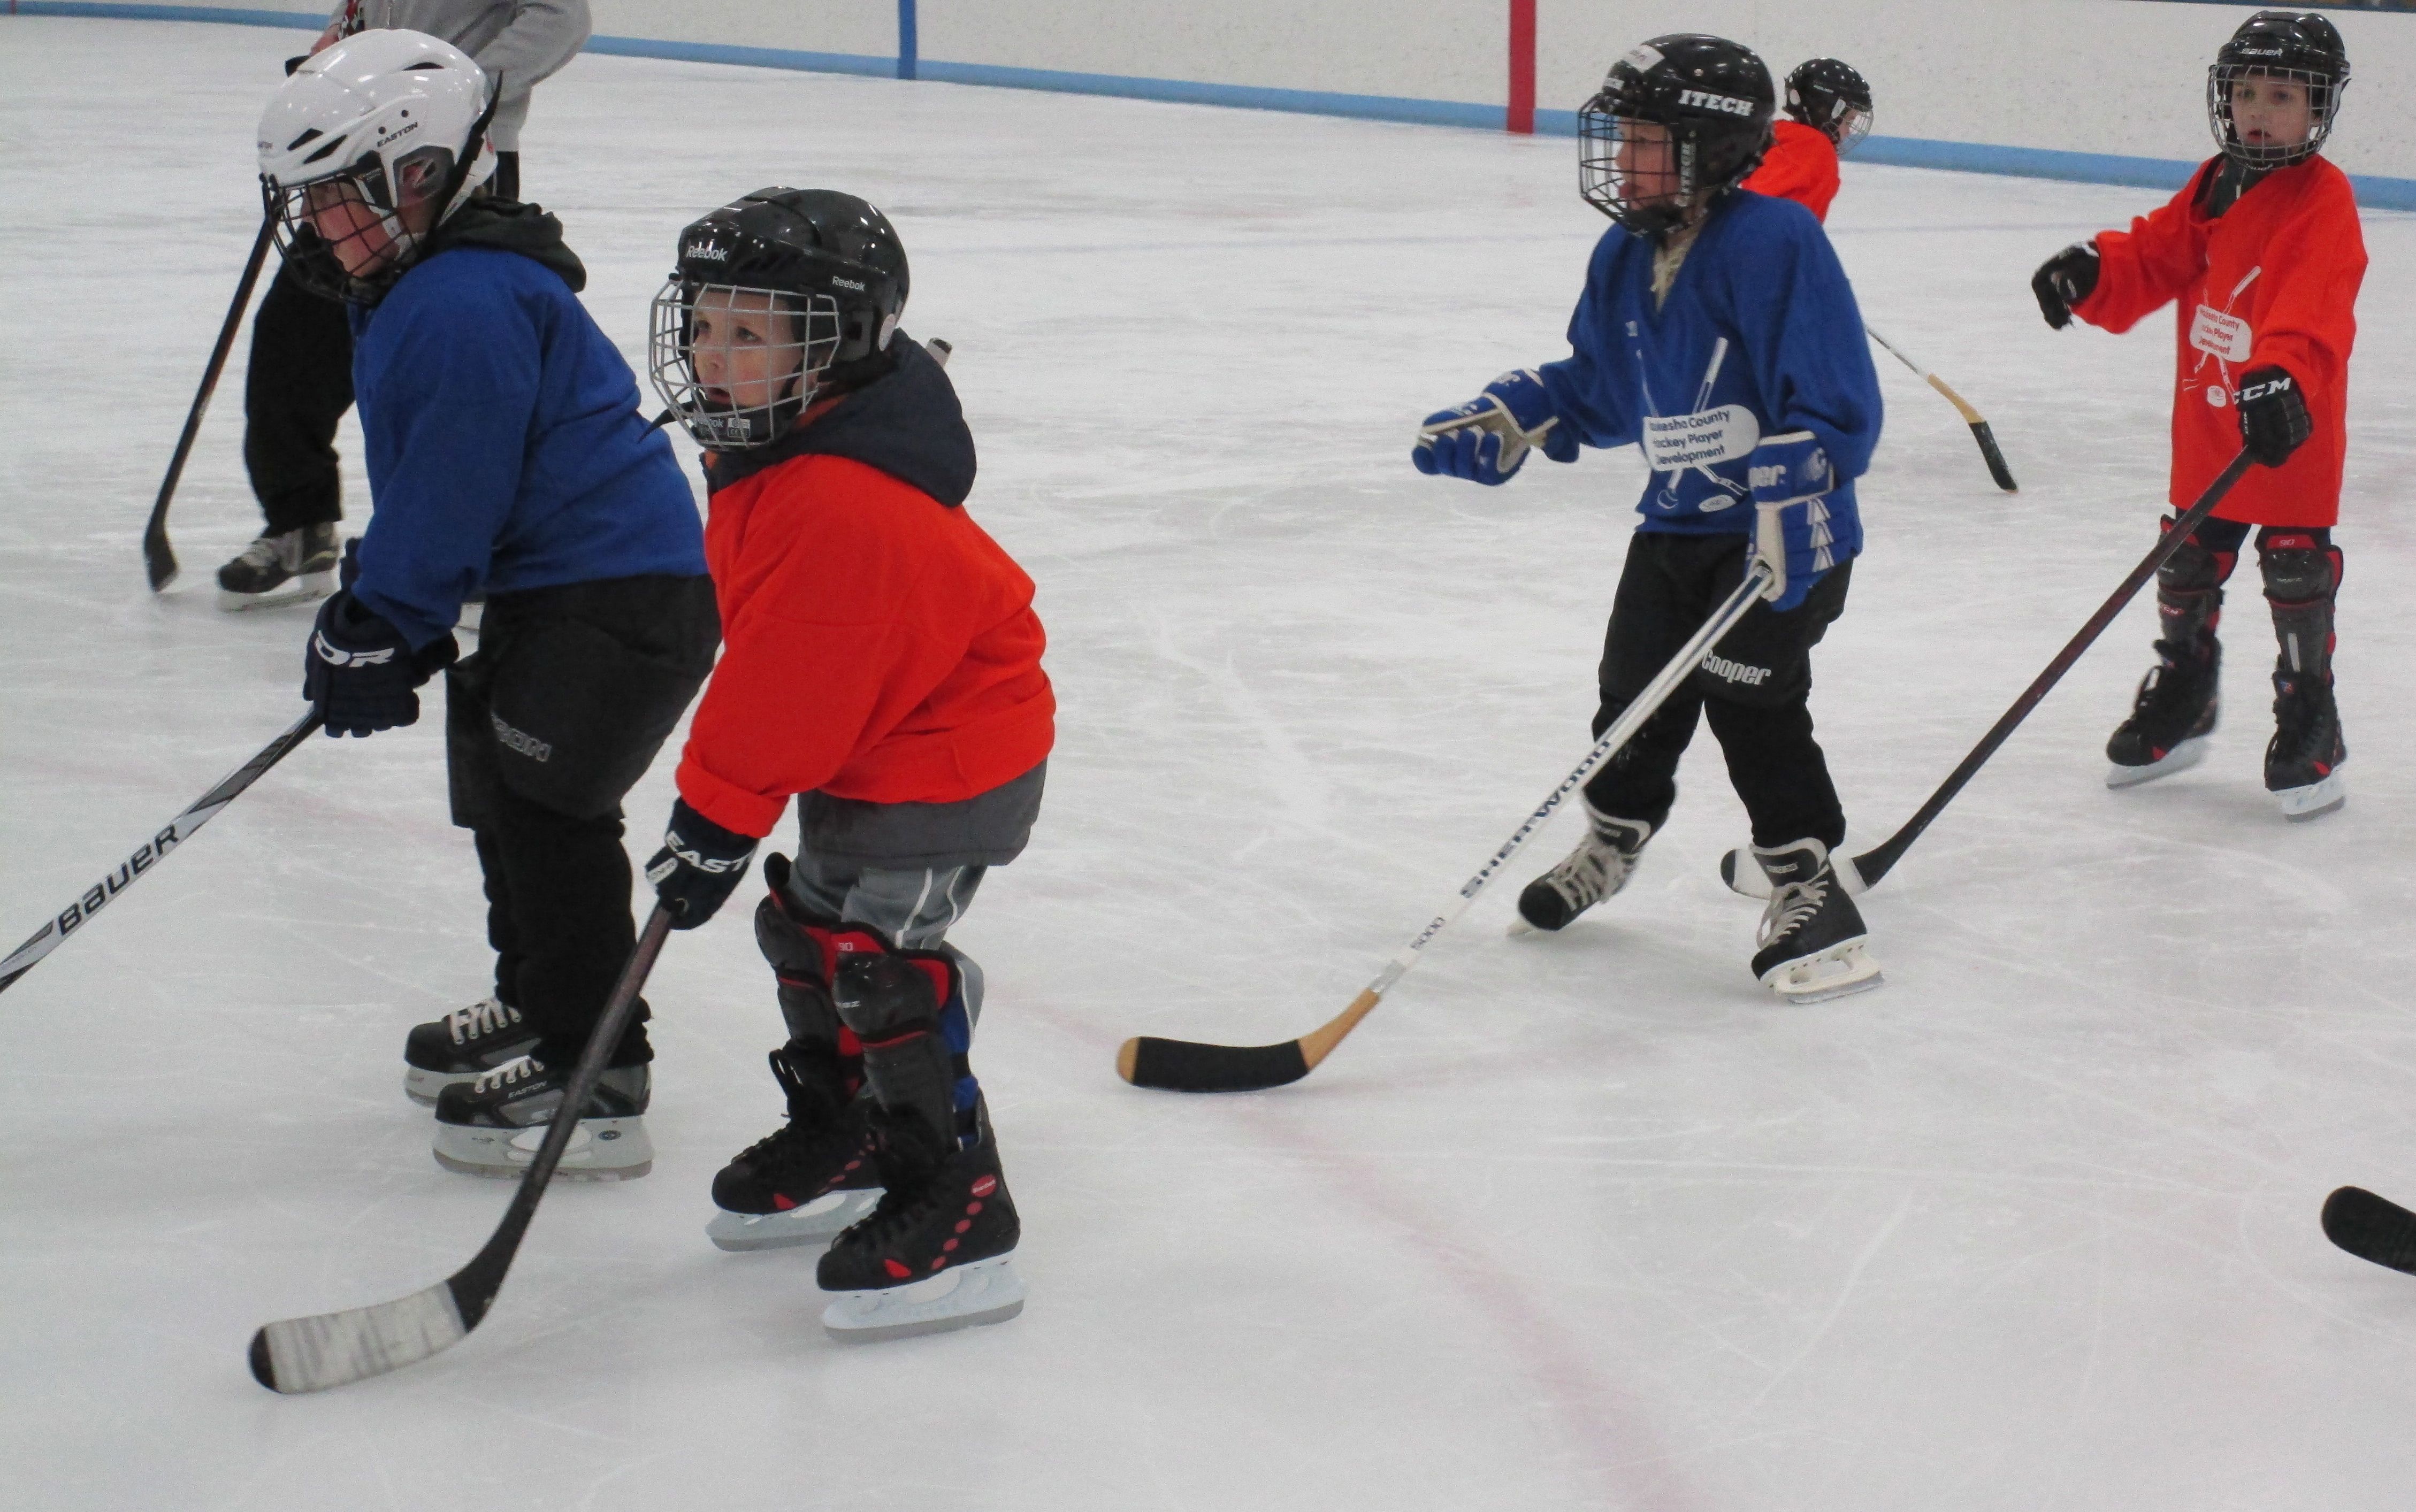 Eble Park Ice Arena offers learn-to-play hockey classes for children and adults at various times throughout the year. After completion of the class, players have the option to join a local hockey league.